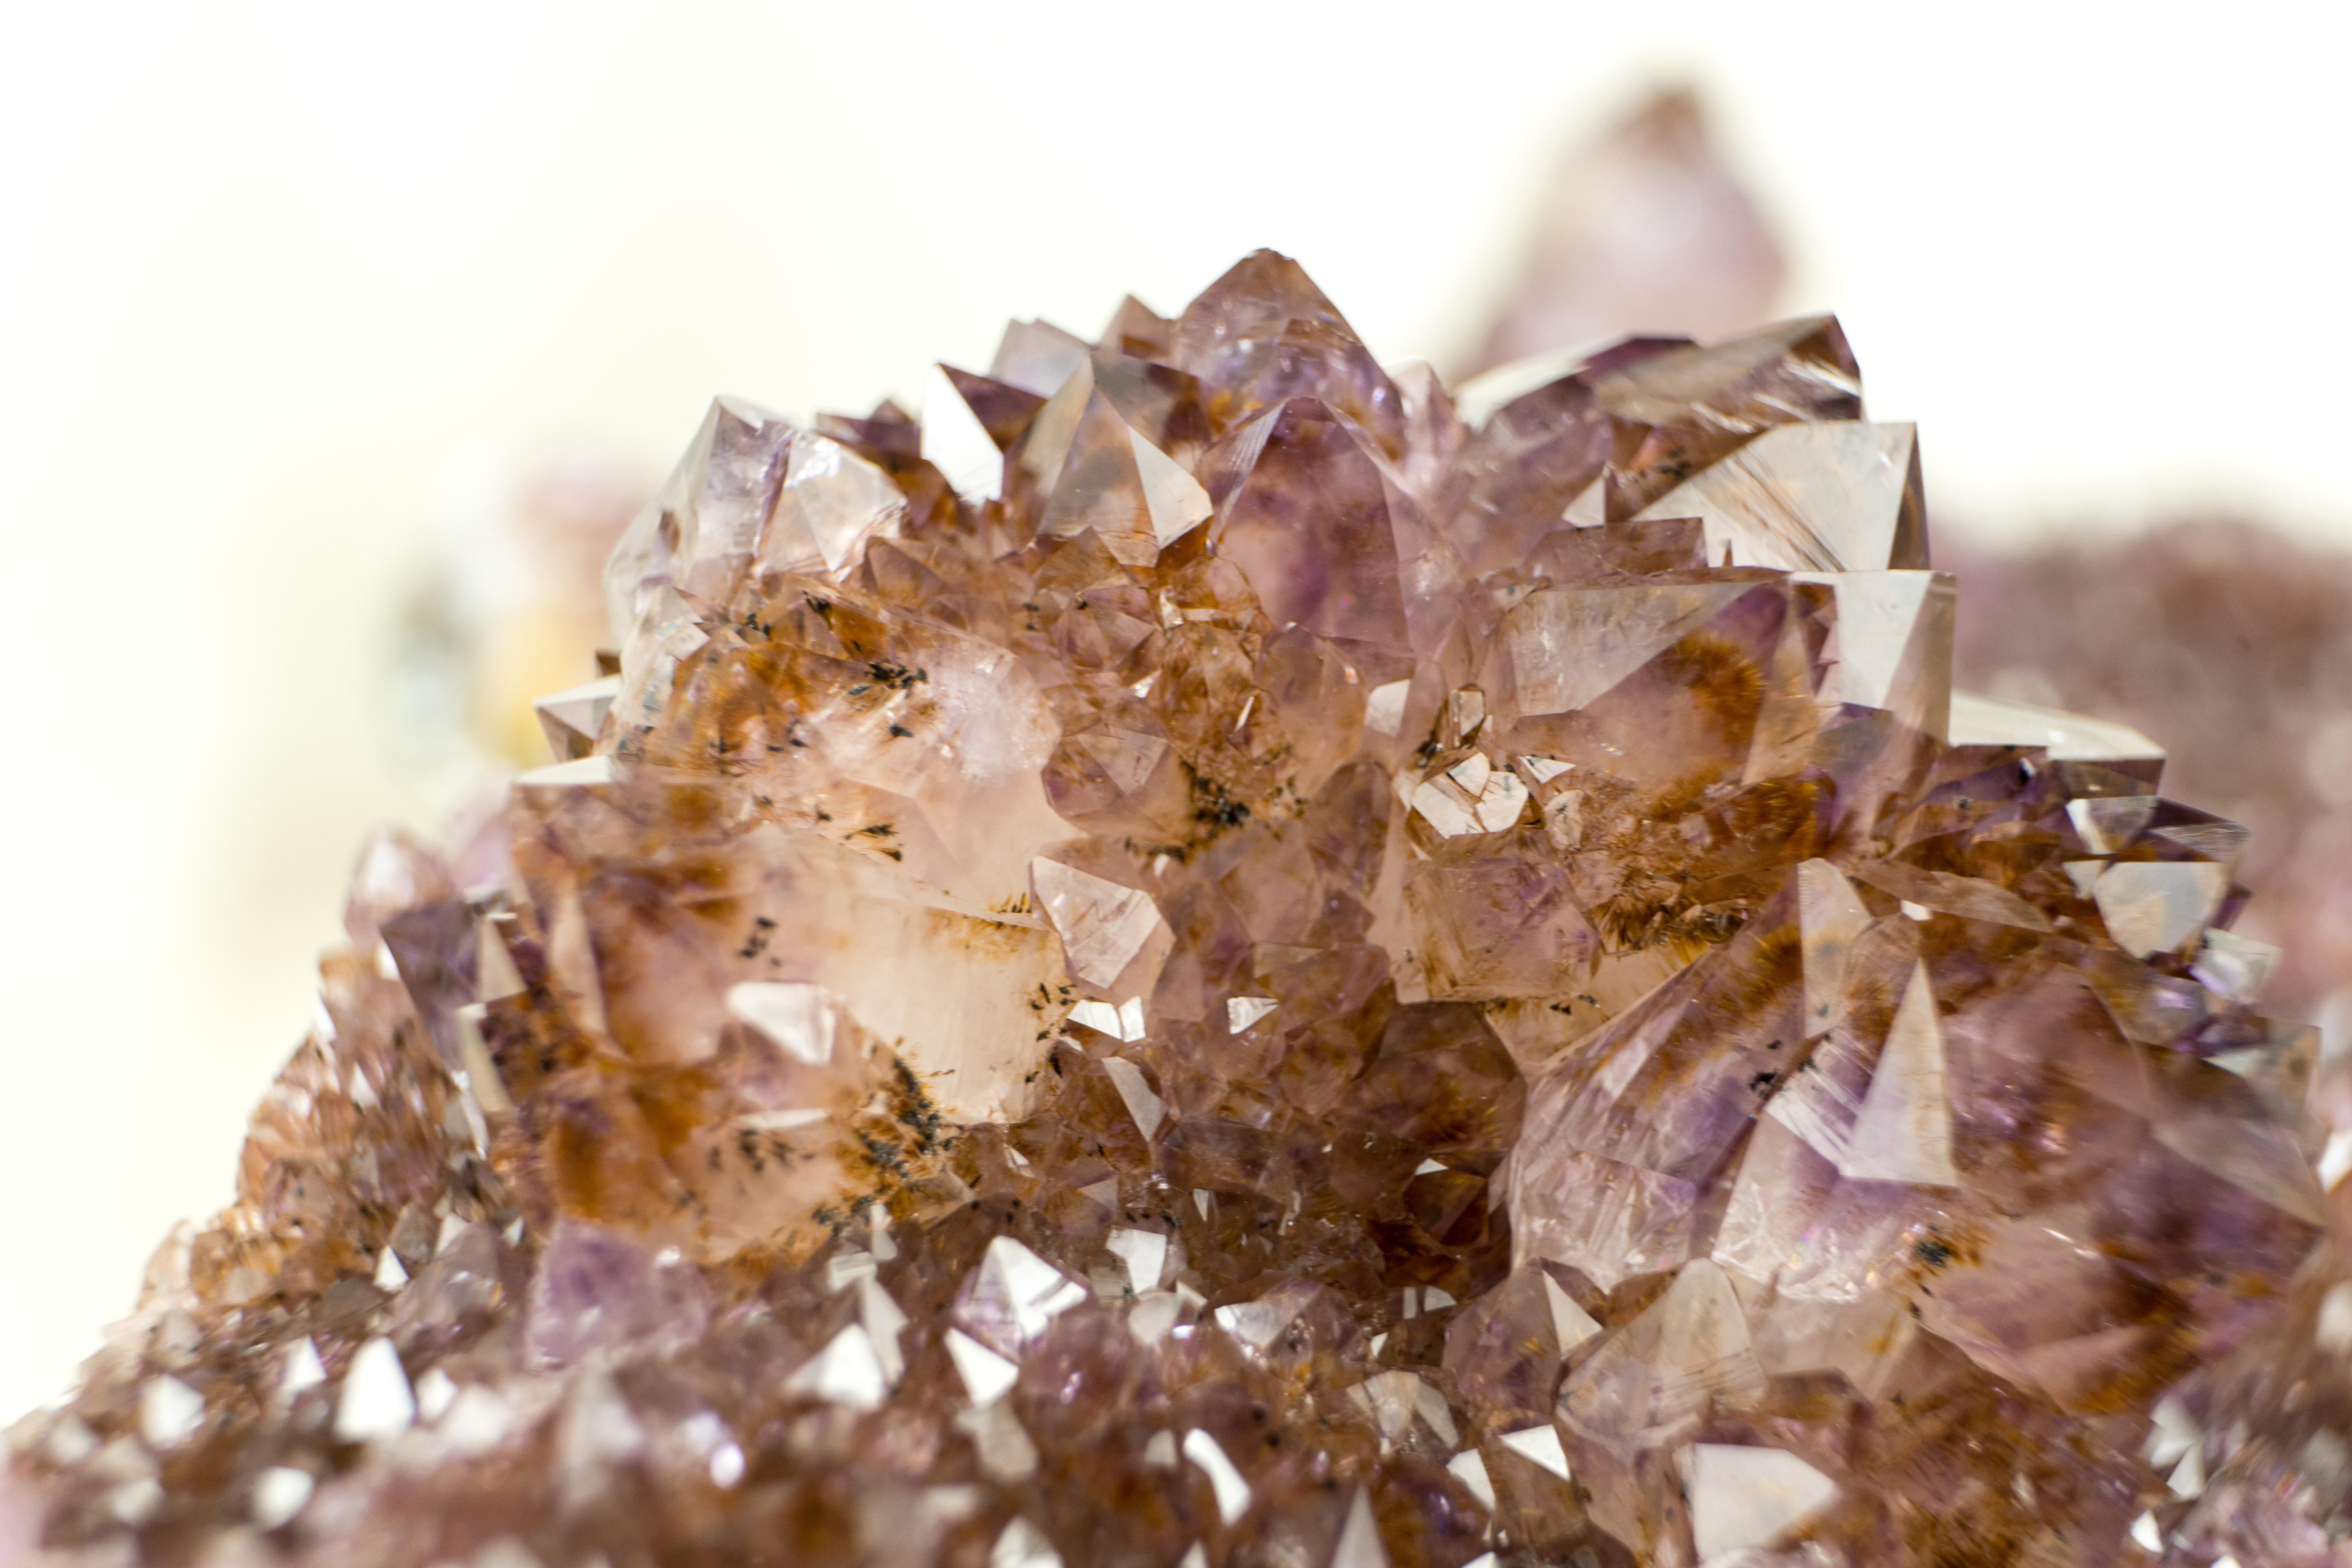 Rare, bringing world-class characteristics, this incredible Amethyst specimen is a one-of-a-kind natural sculpture to add to your Crystal Cabinet, surely deserving a top spot. 

This specimen has many highlights, but its main flower is a spectacle